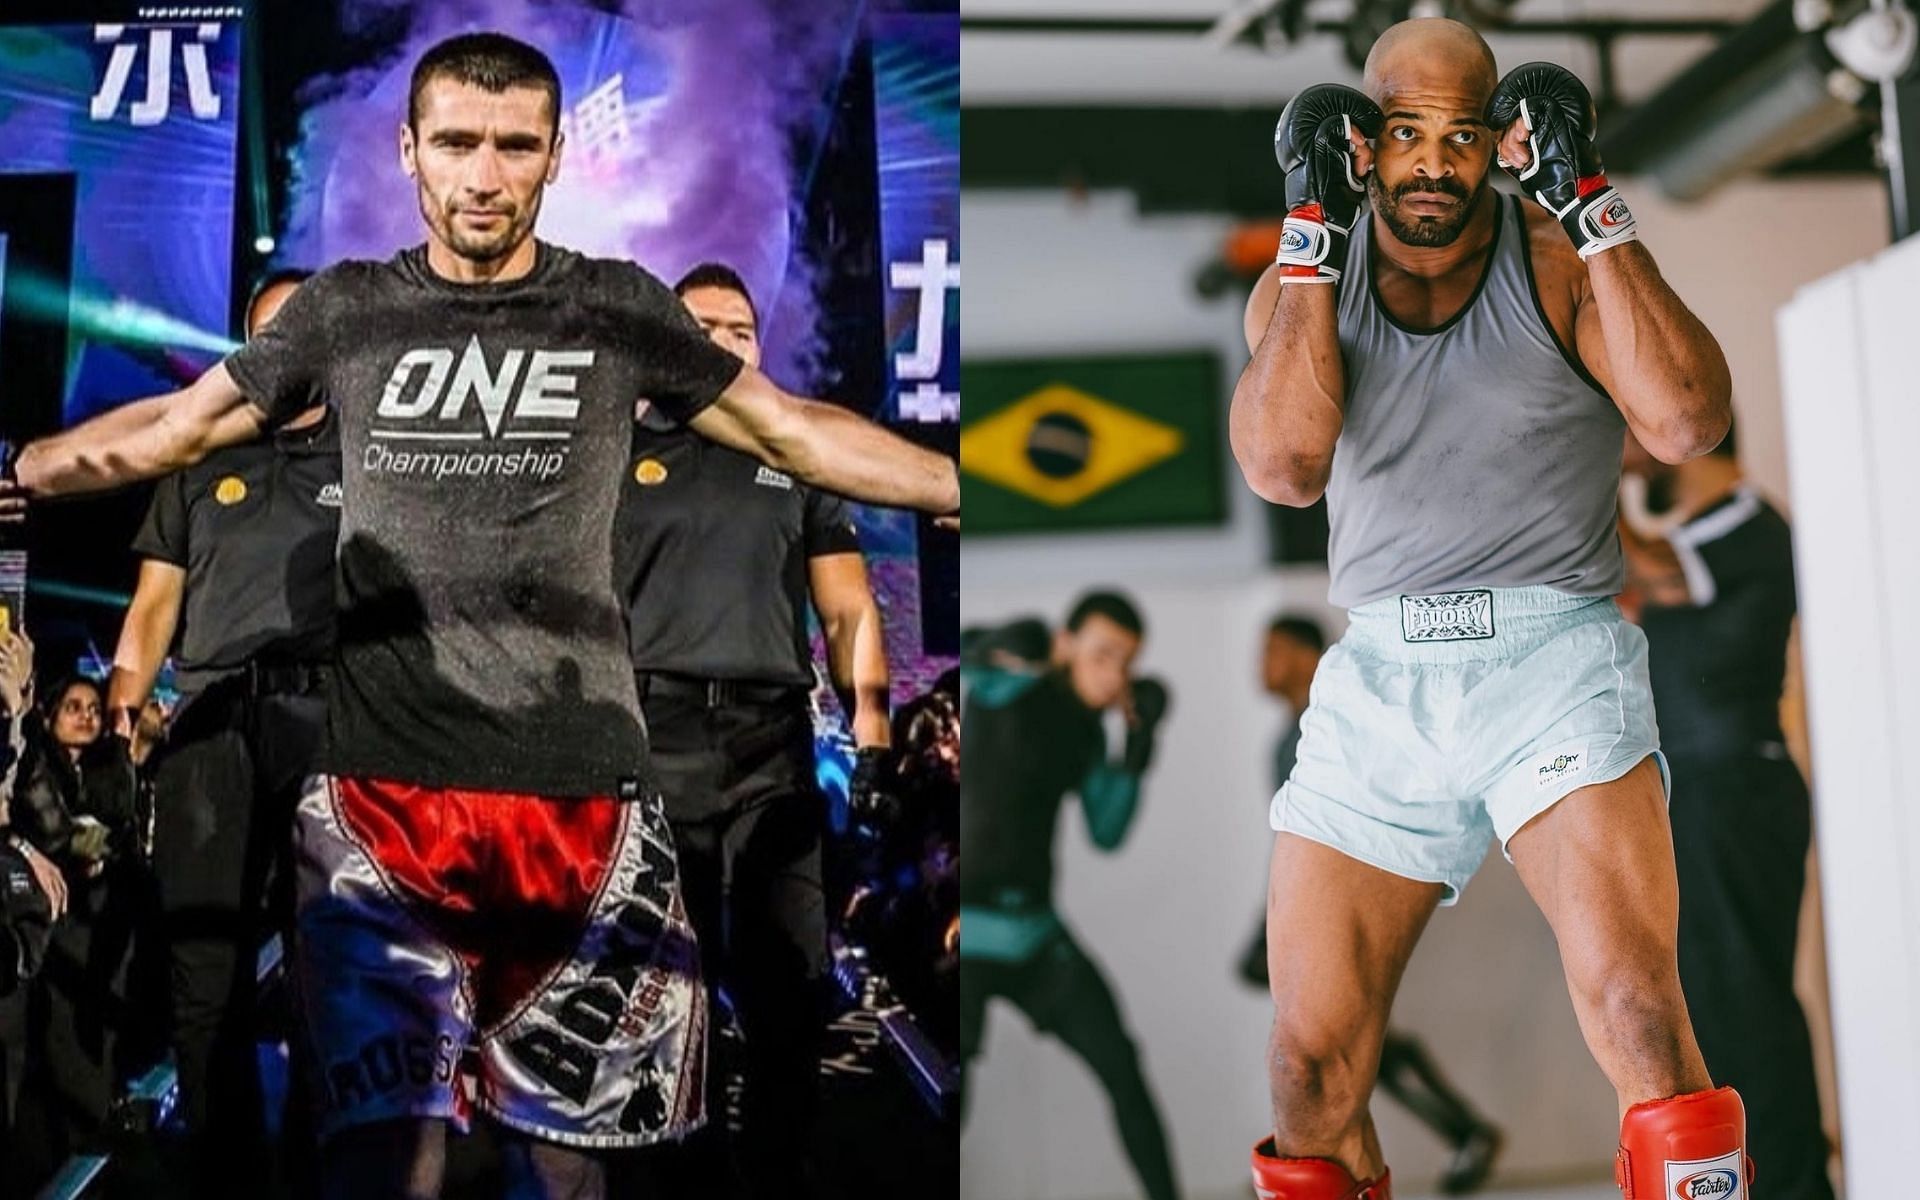 ONE Championship drops Jamal Yusupov (left) and David Branch (right) out of Full Circle due to health protocols. [Photos: Jamal Yusupov, David Branch on Instagram]